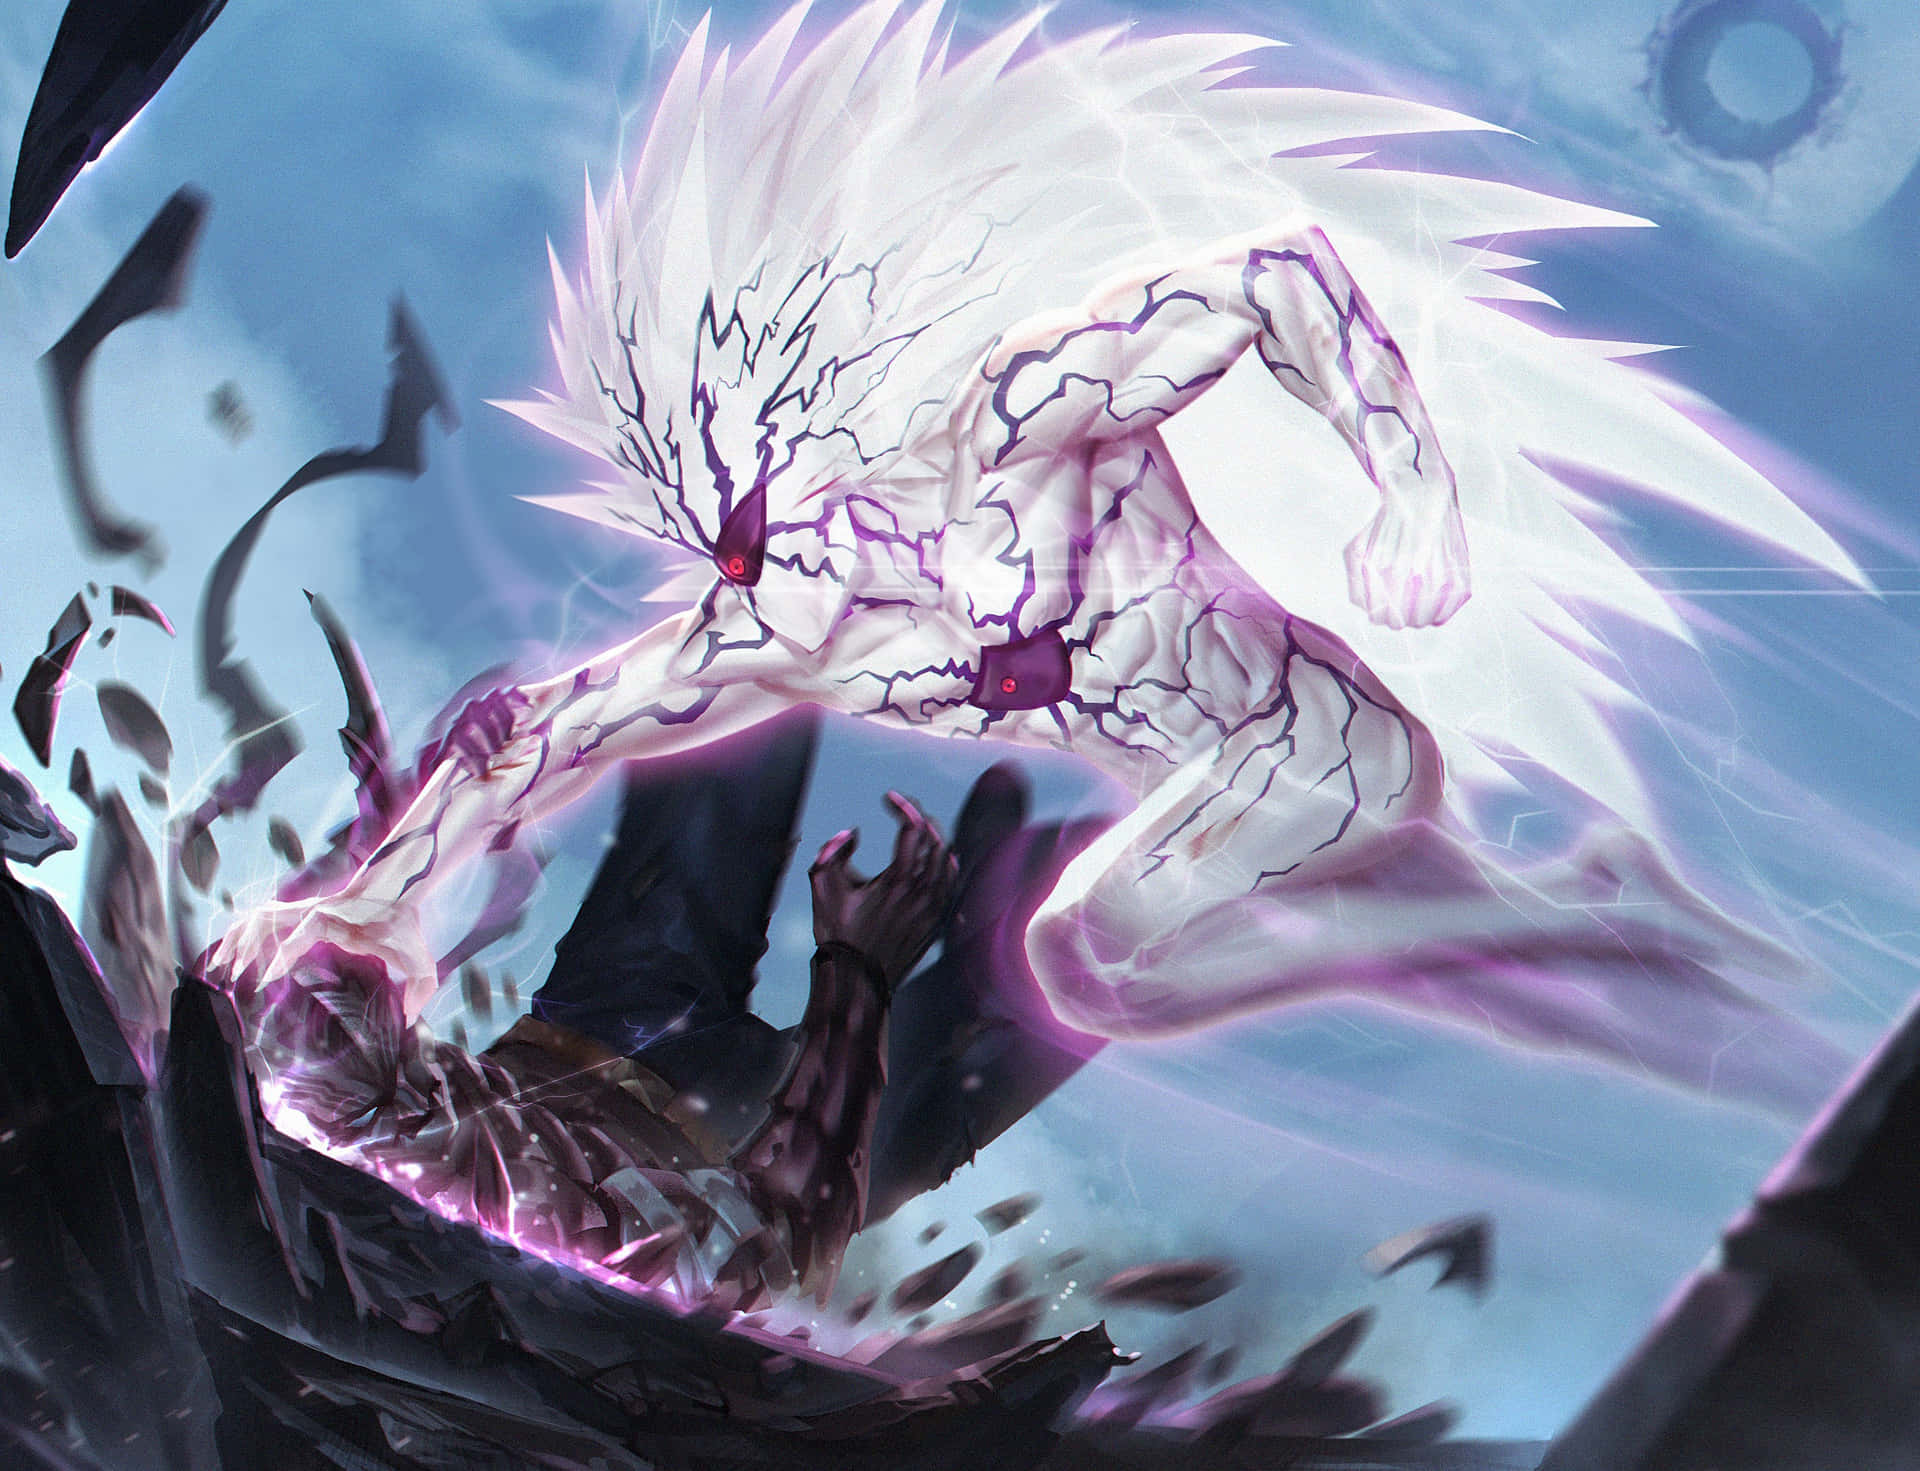 Lord Boros Computer Wallpapers Desktop Backgrounds  2336x1314  ID670861   One punch man One punch Anime